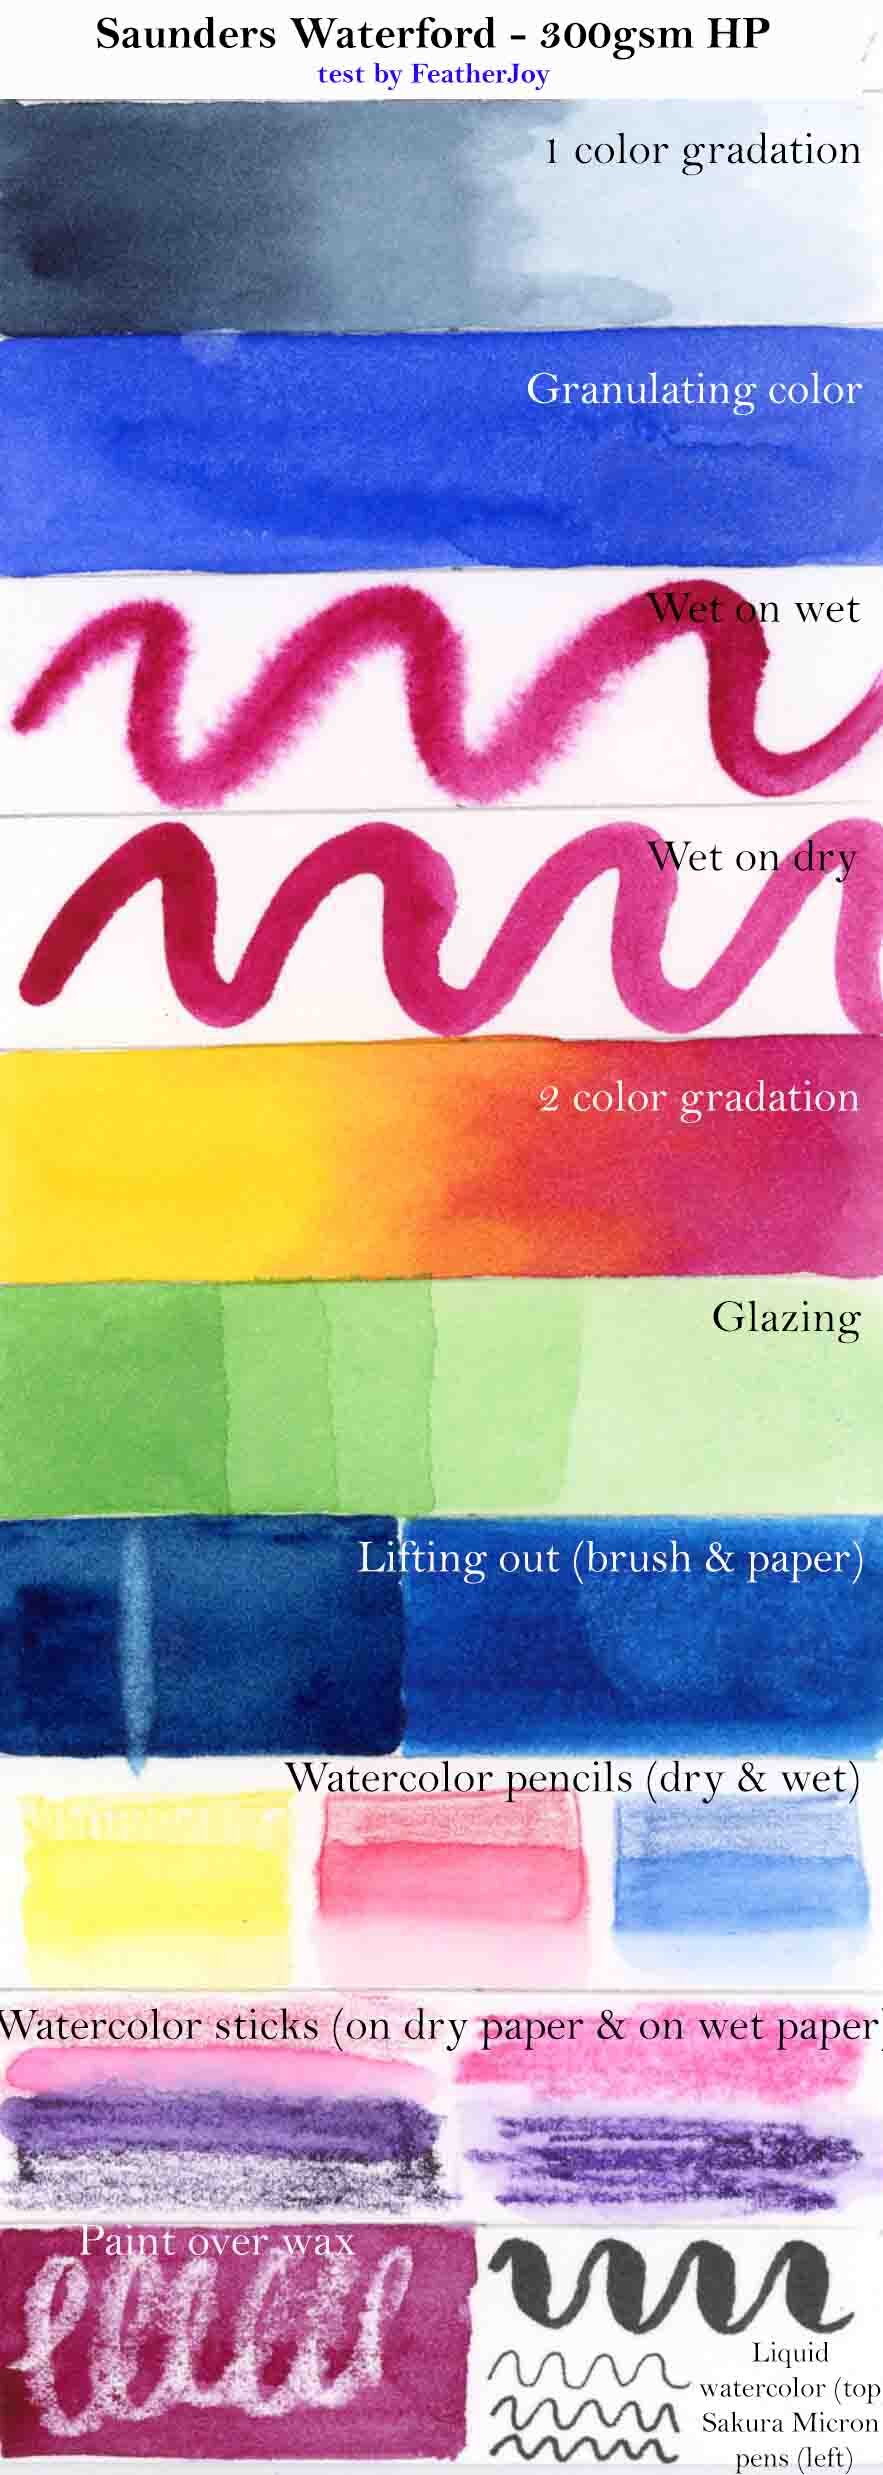 Review & Tests on 10 Professional Grade Watercolor Papers — FeatherJoy